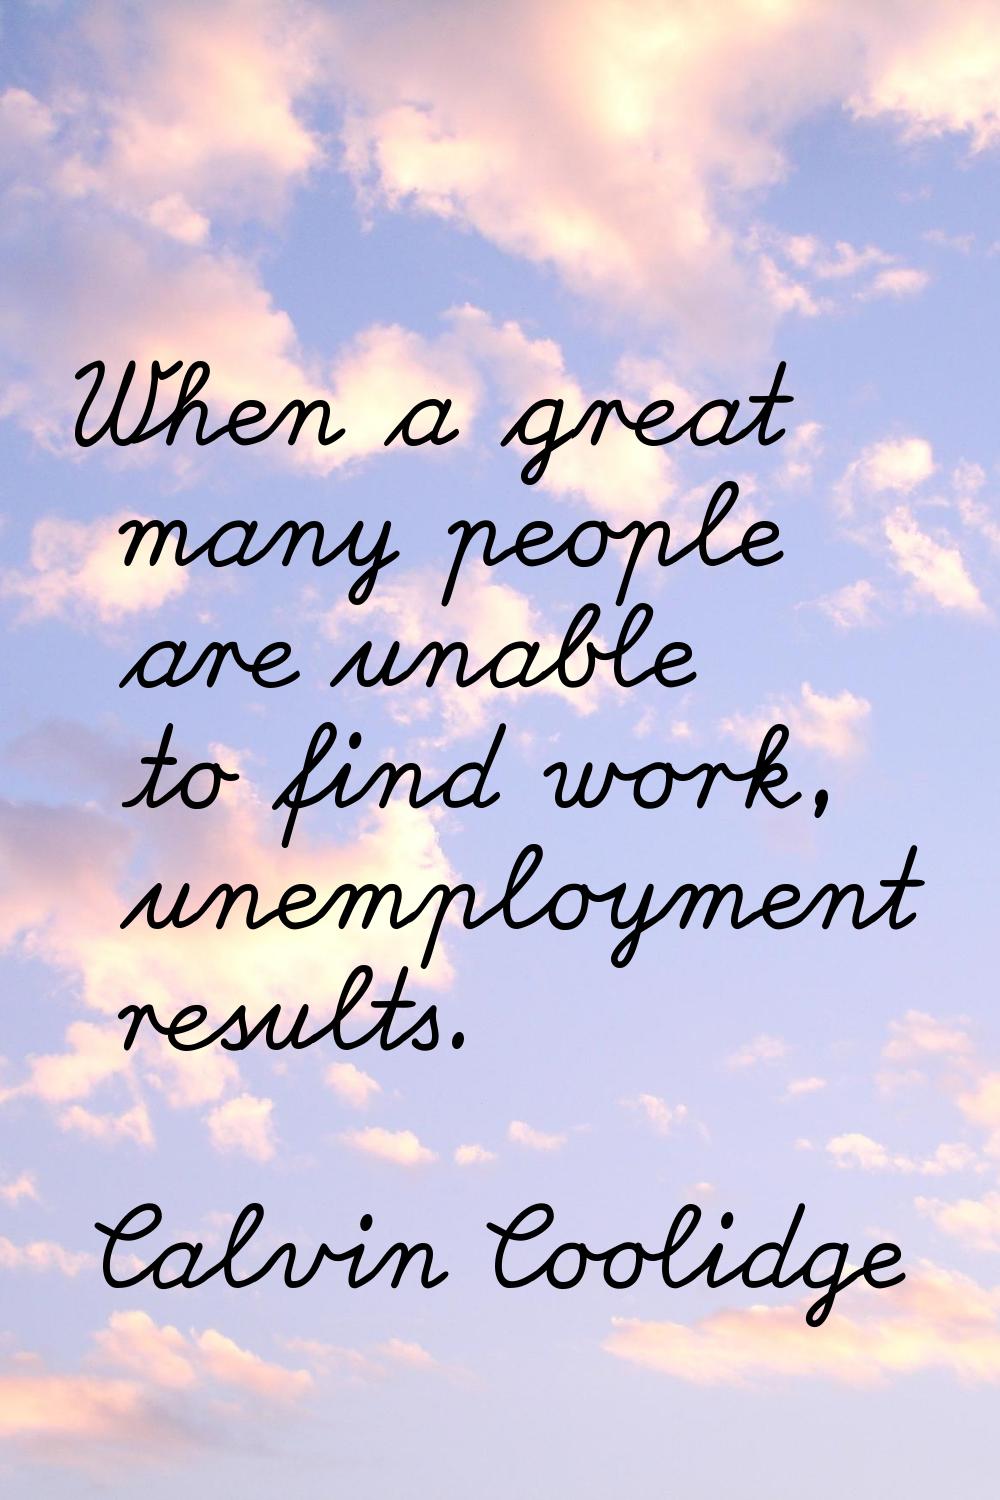 When a great many people are unable to find work, unemployment results.